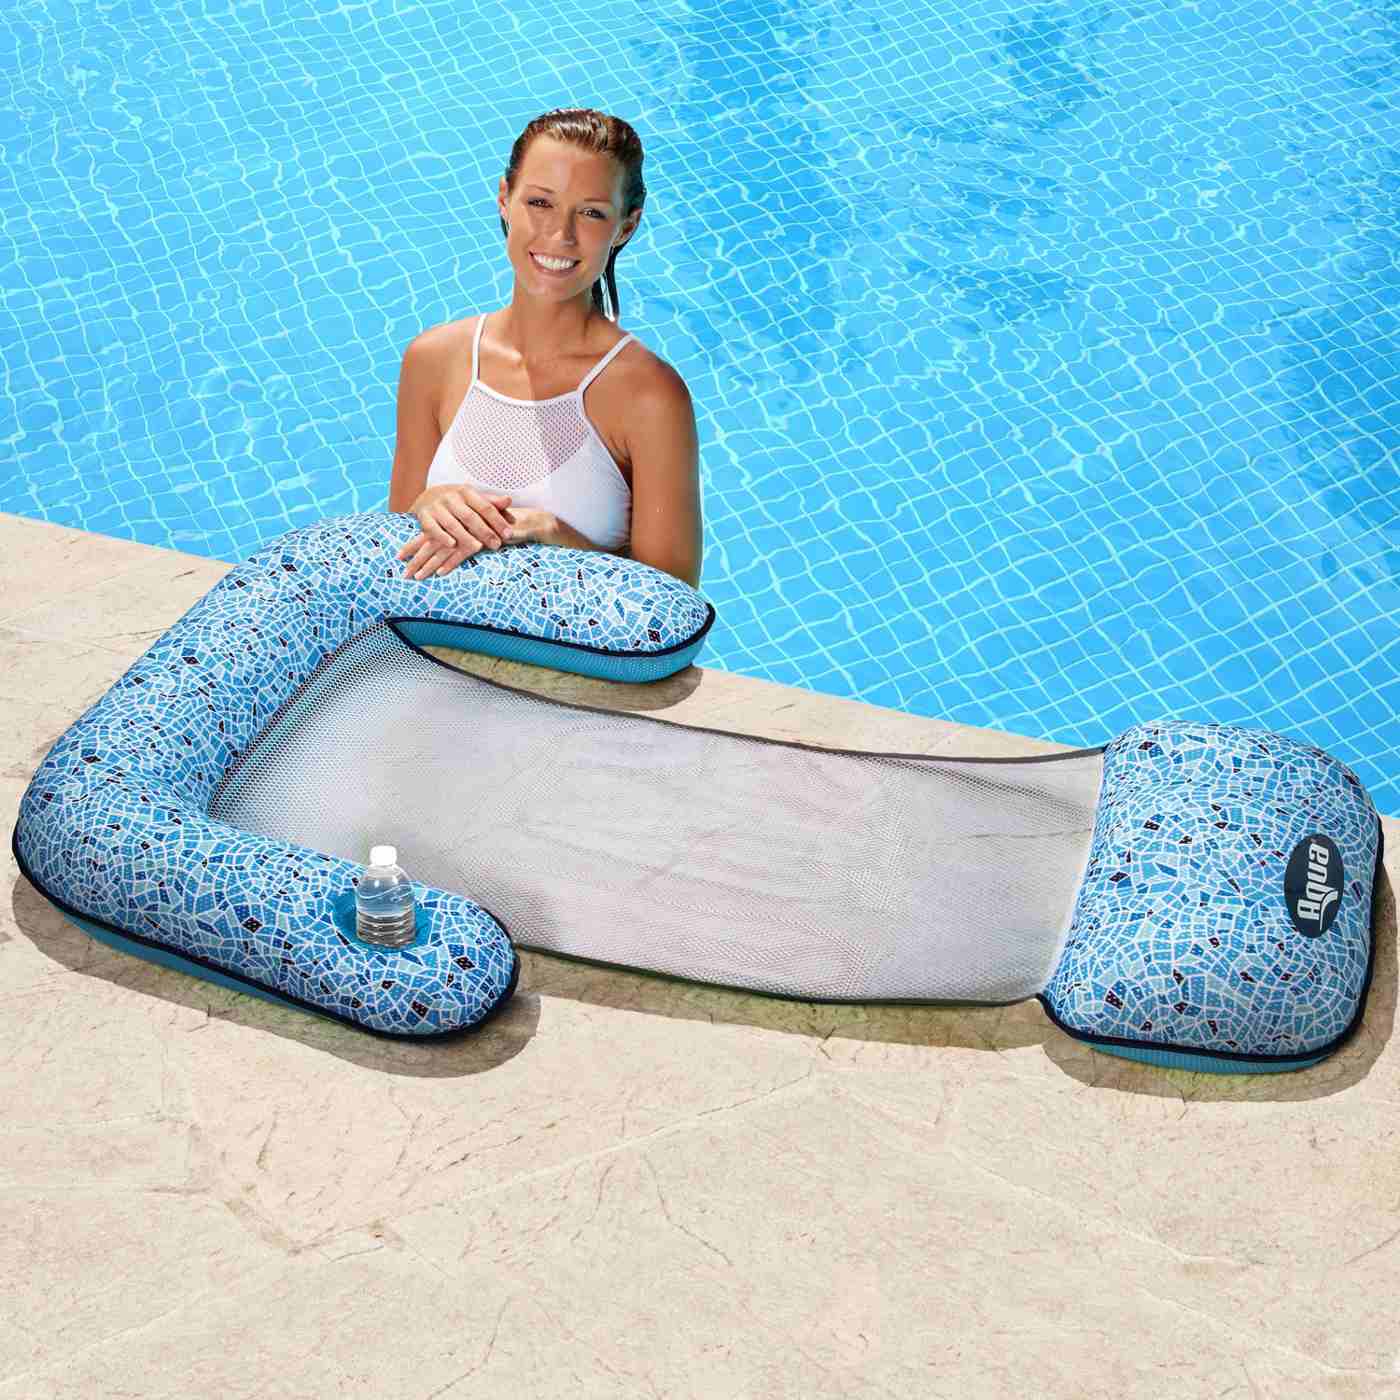 Aqua Leisure 3-in-1 Lounge Chair; image 2 of 4